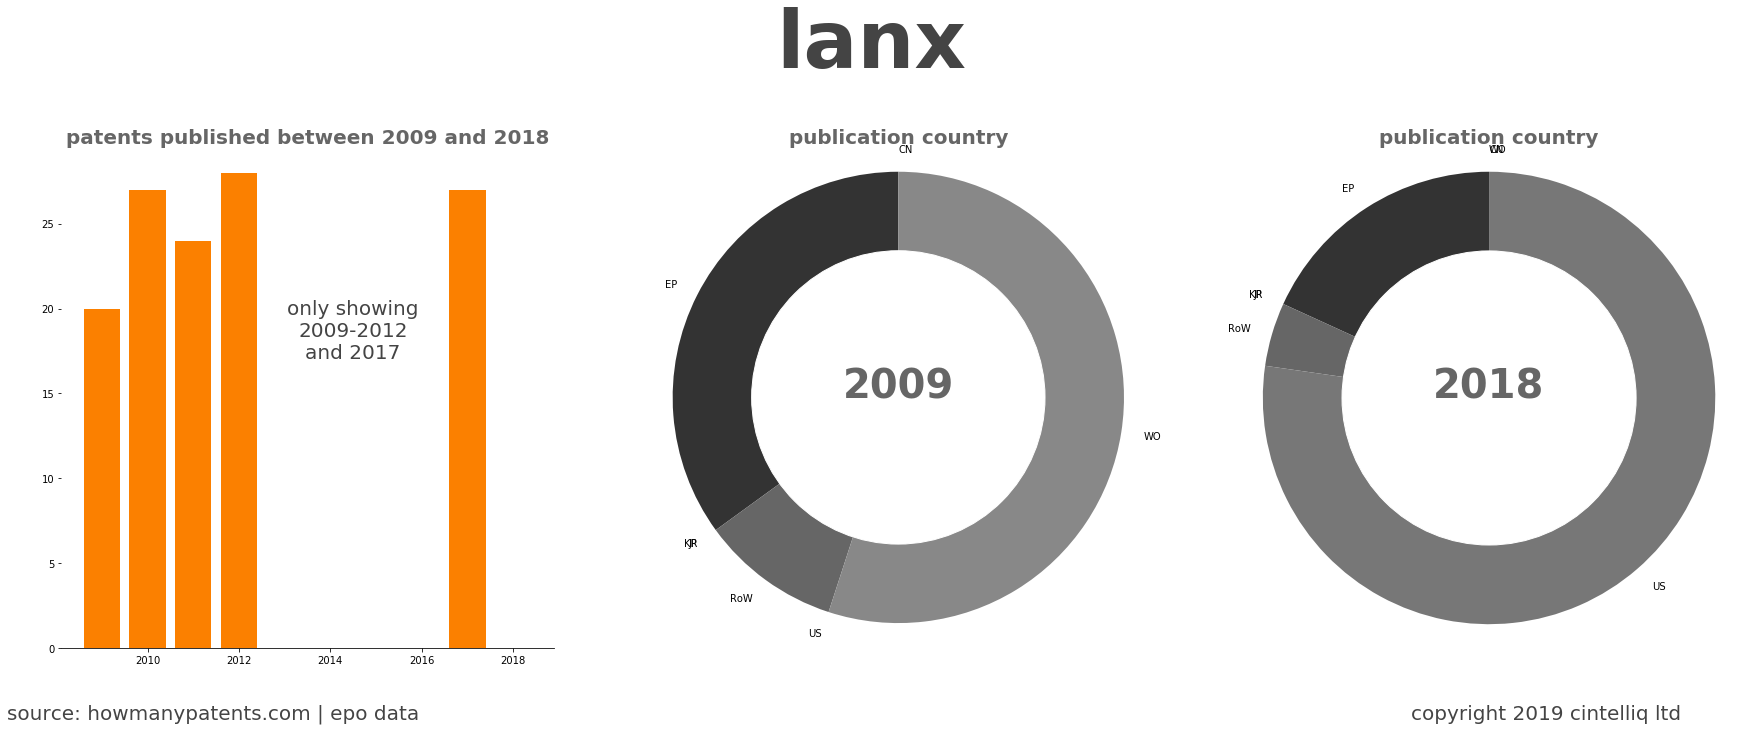 summary of patents for Lanx